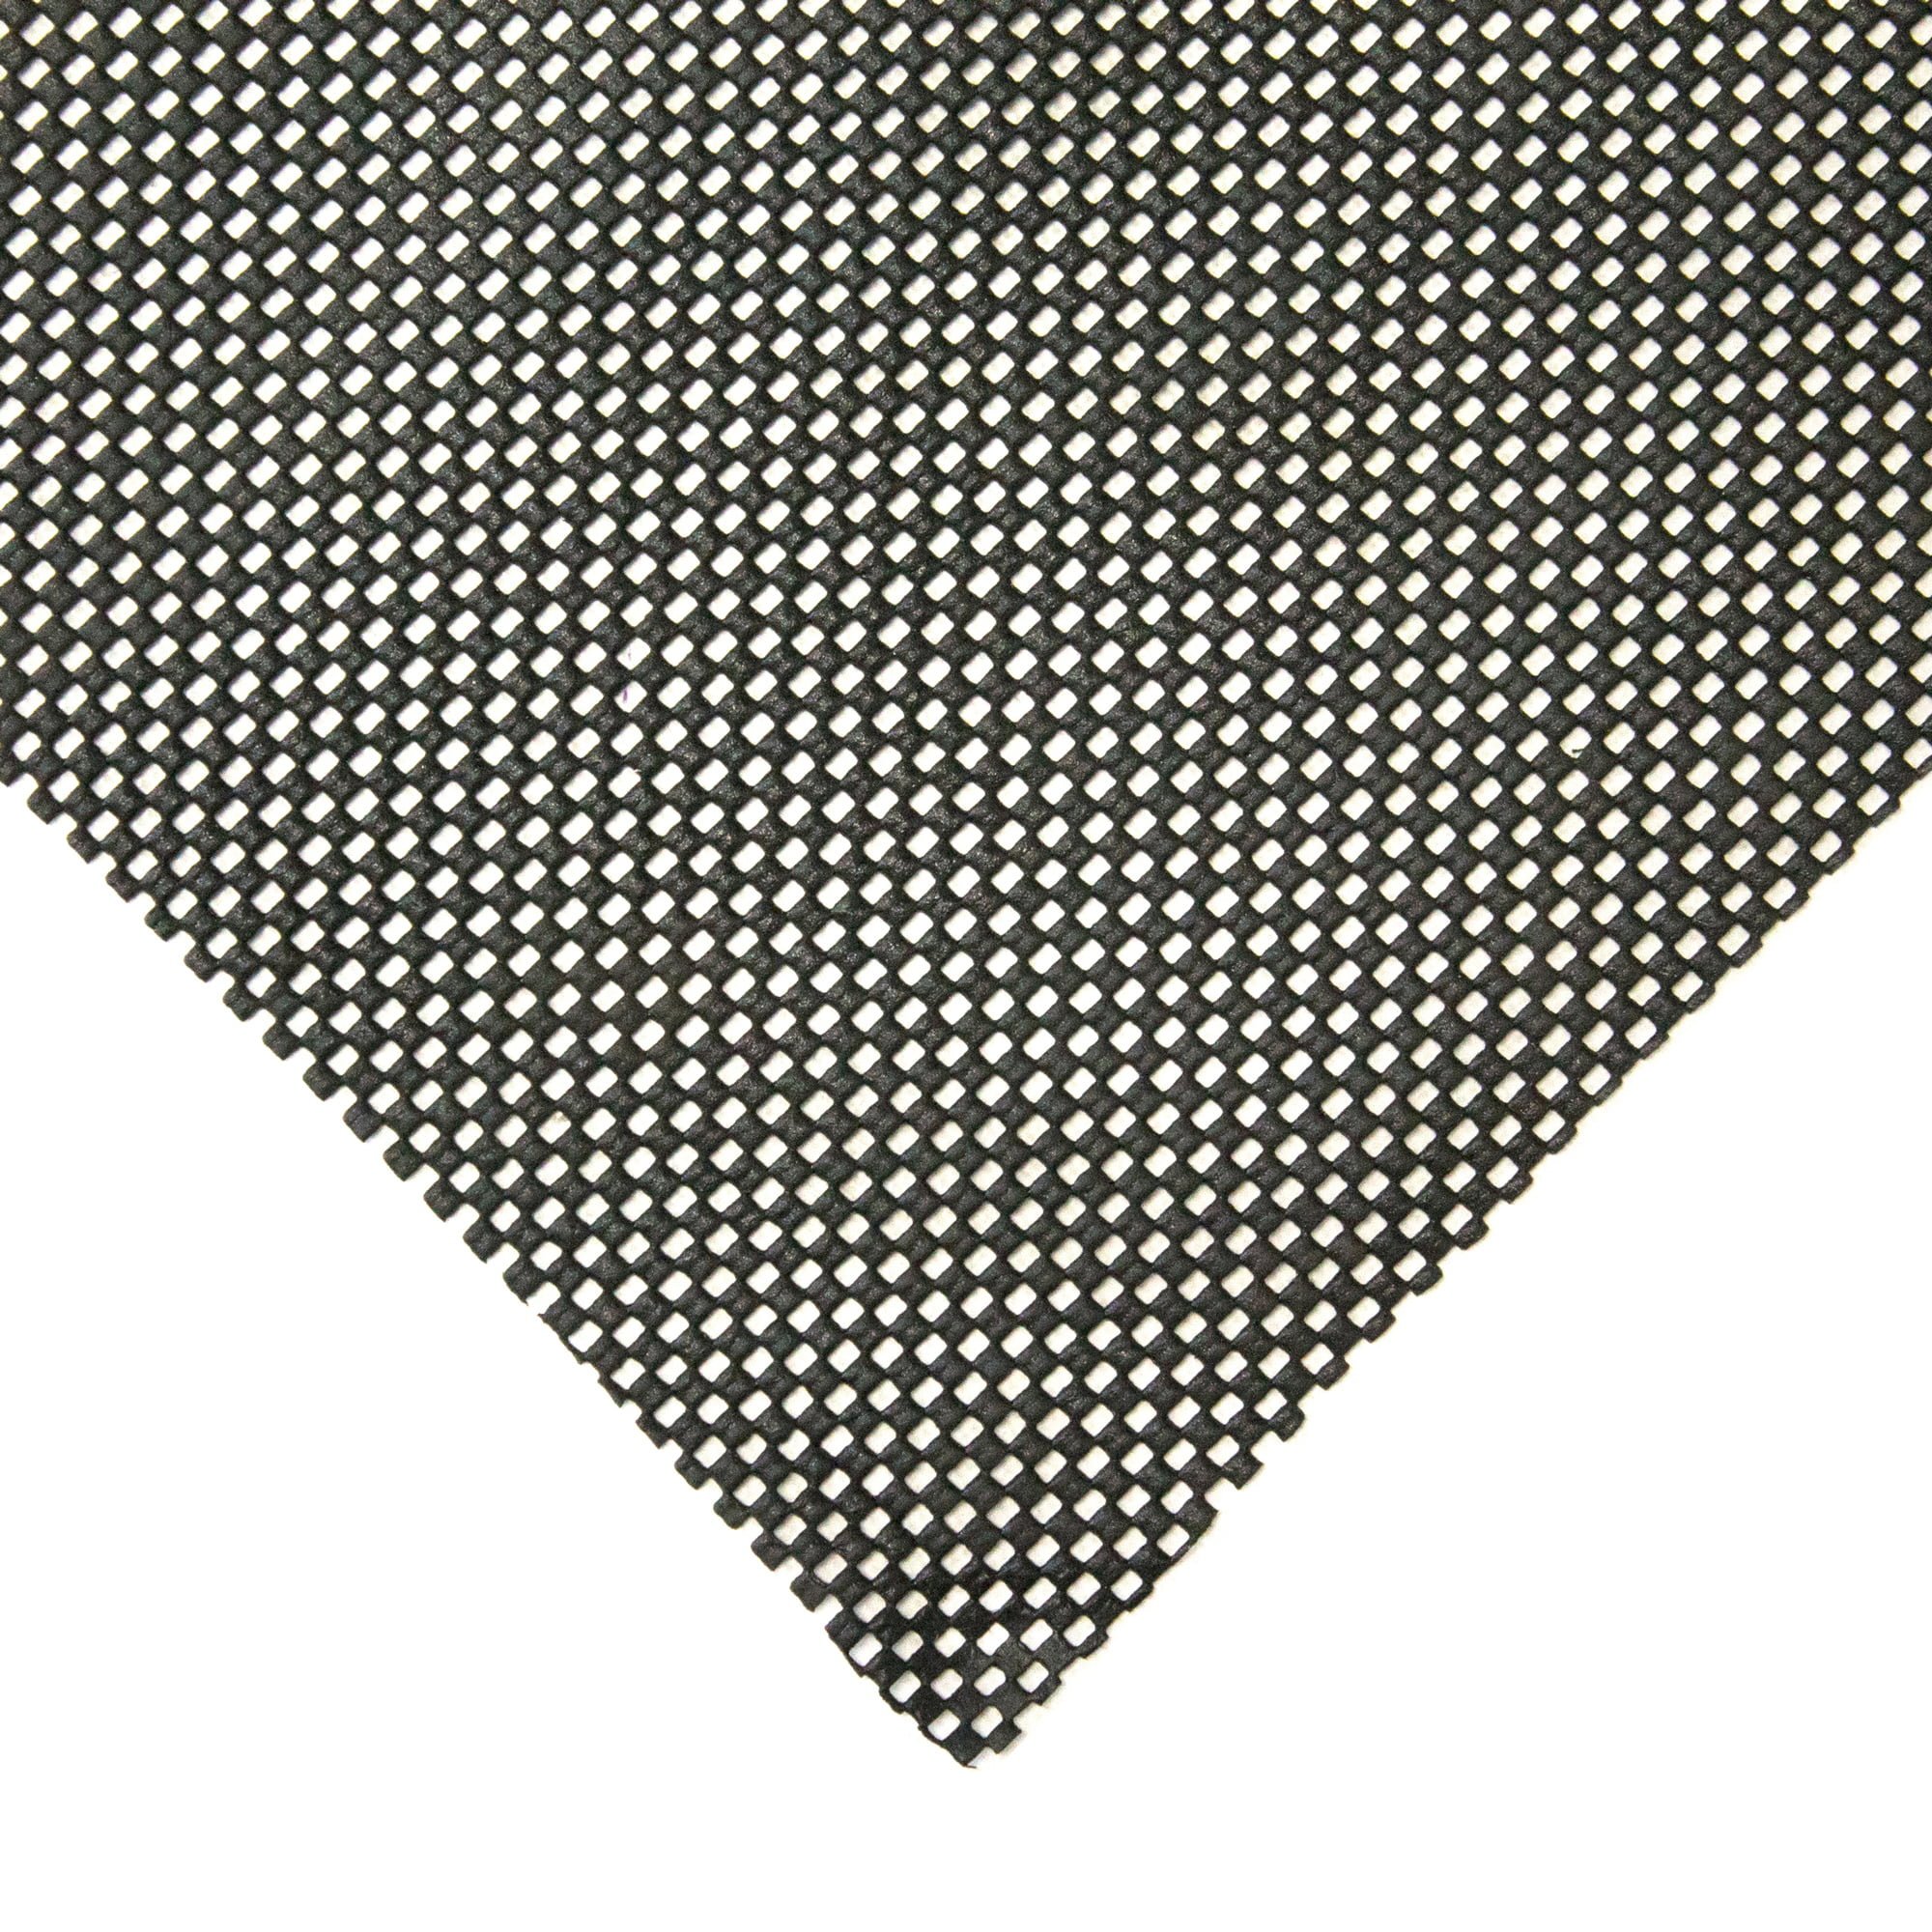 corner-image-of-a-gripsafe-catering-mat